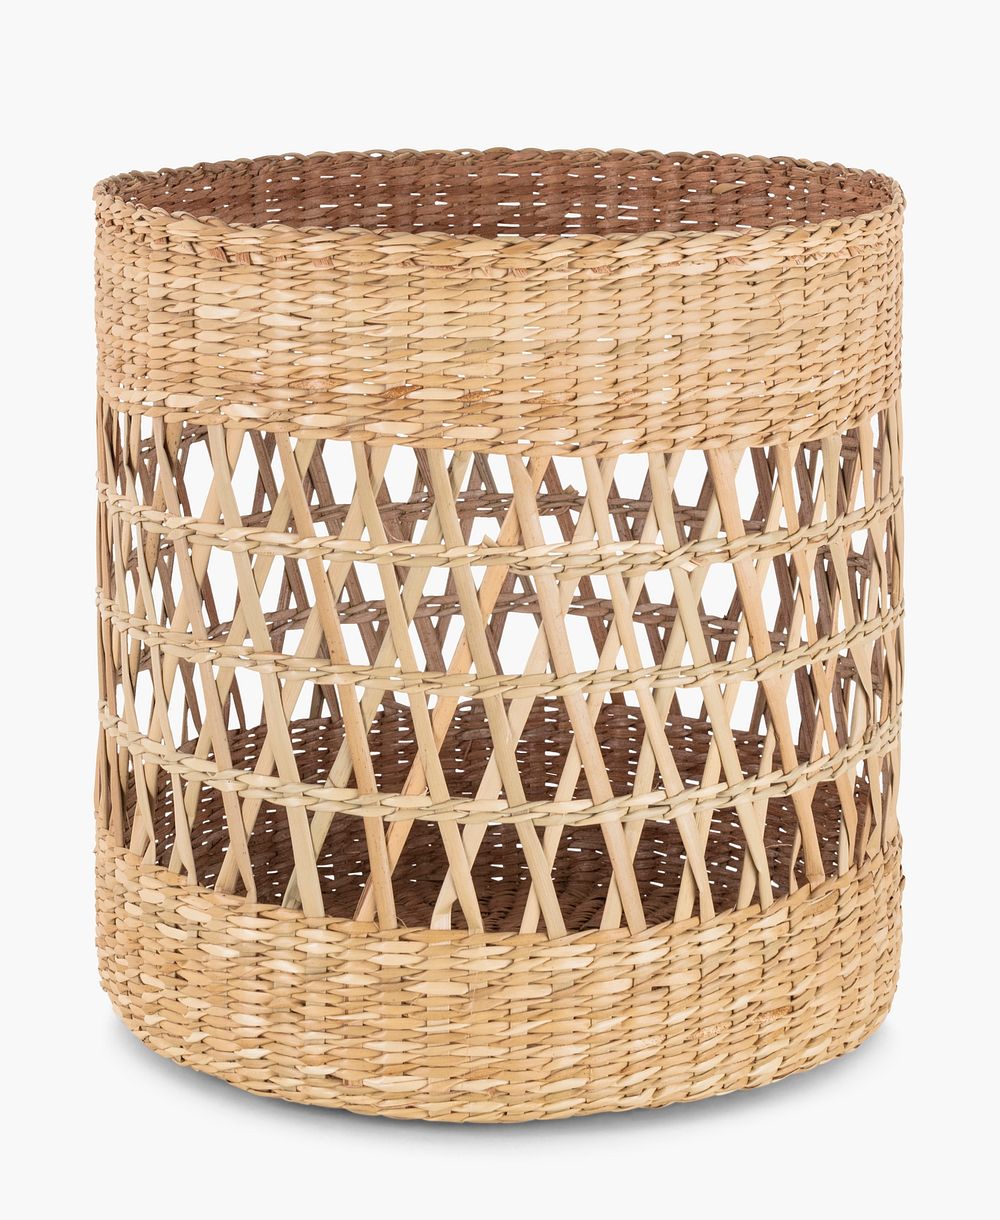 Asian woven basket psd mockup for home decor and plants